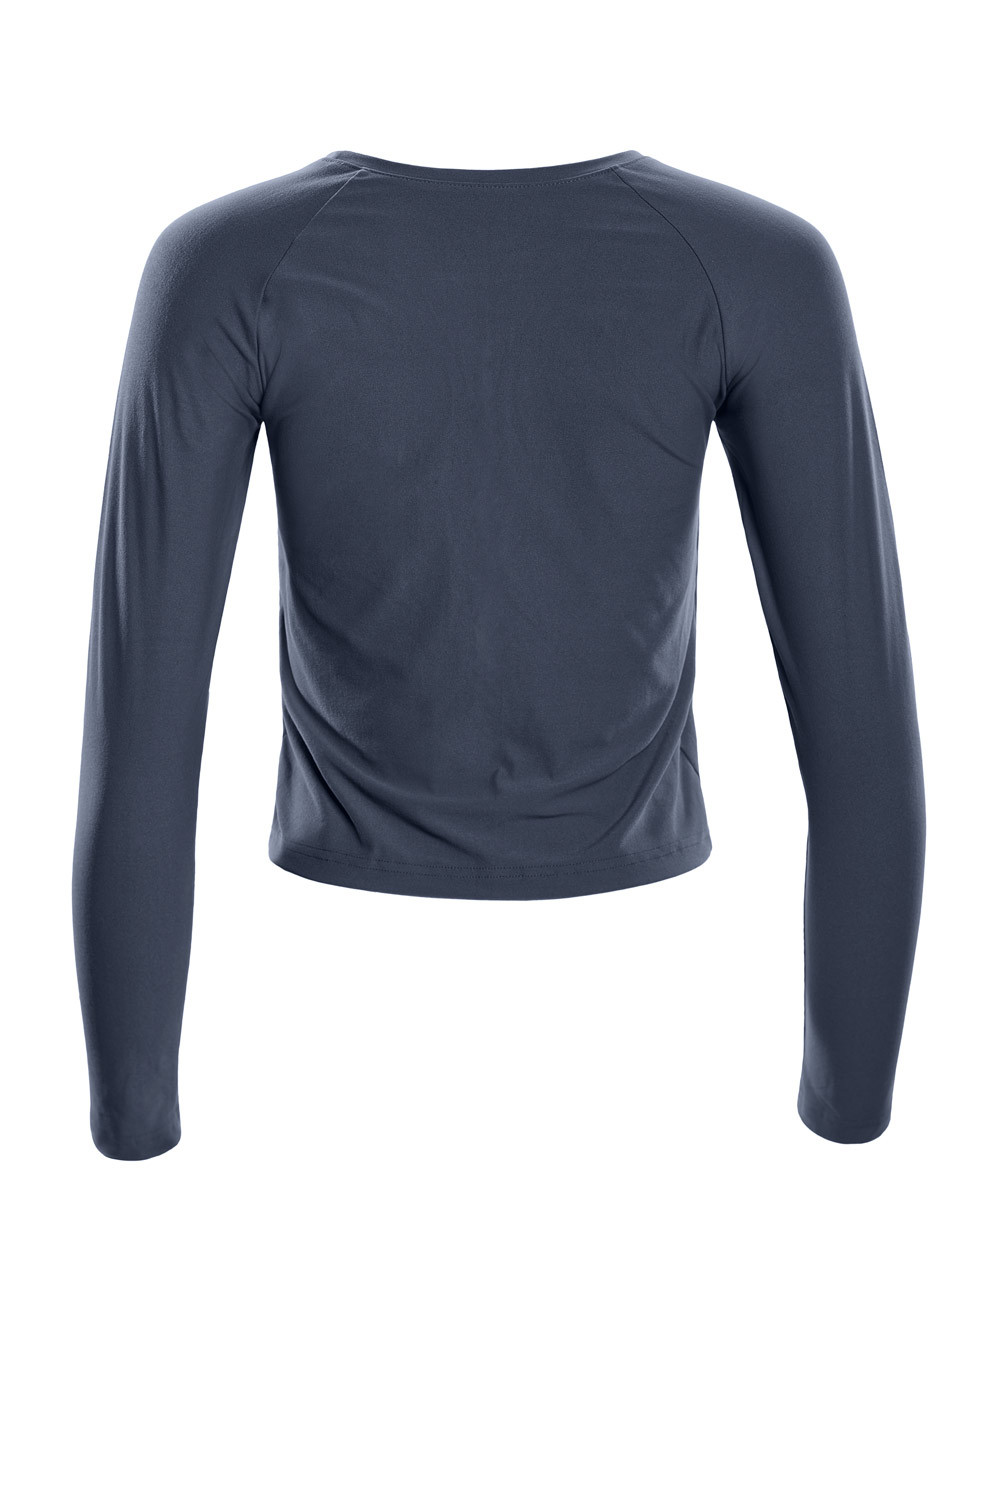 Functional Light and Soft Cropped Long Sleeve Top AET119LS, anthrazit,  Winshape Ultra Soft Style